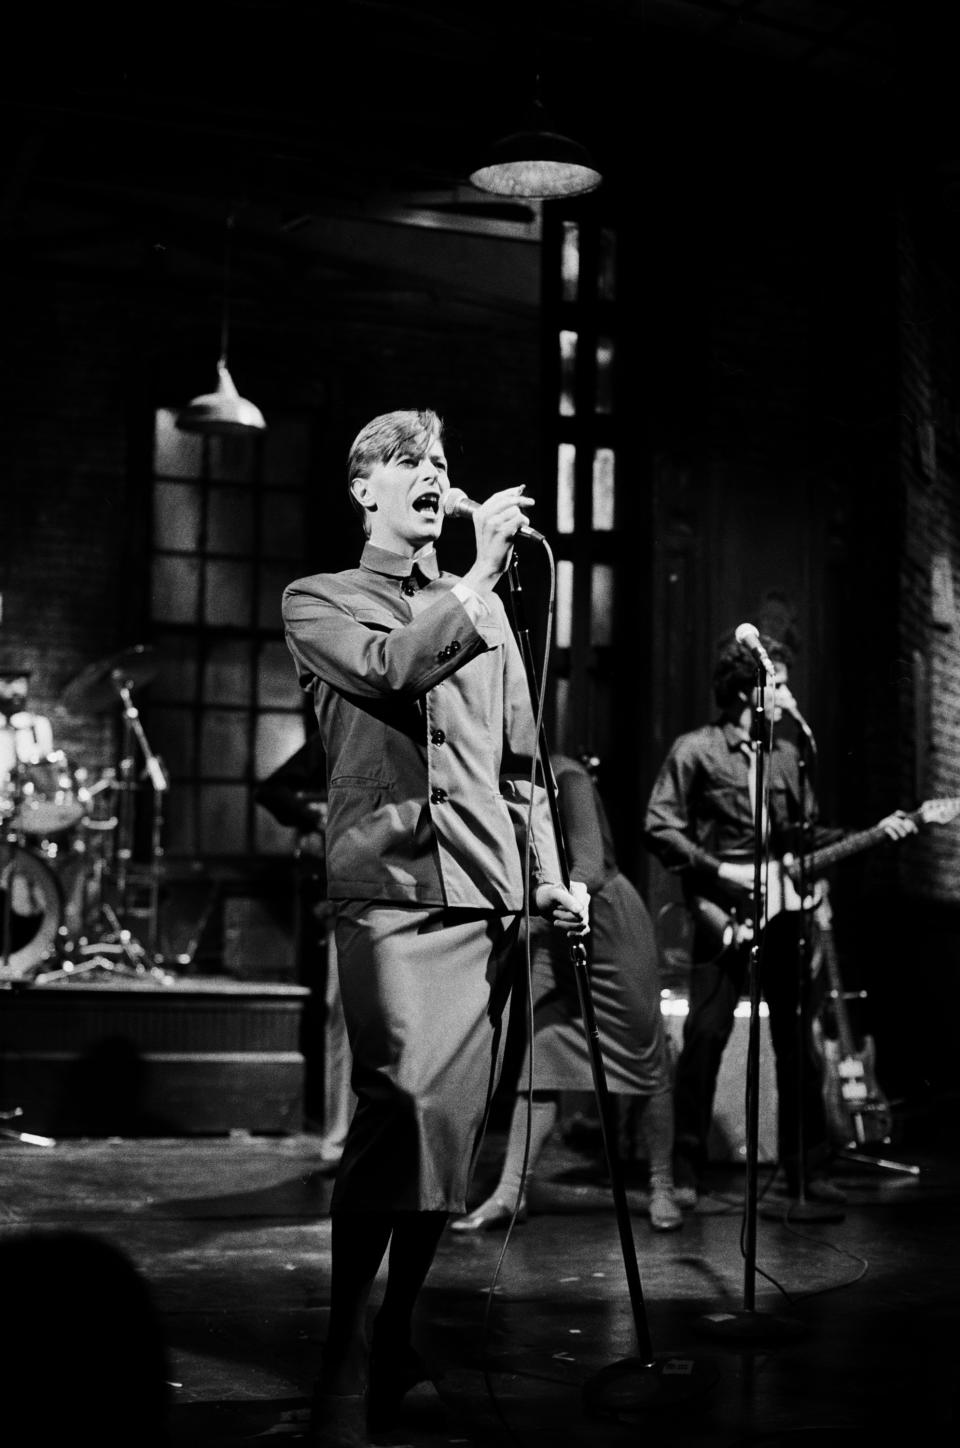 Musical guest David Bowie performs on Saturday Night Live December 15, 1979